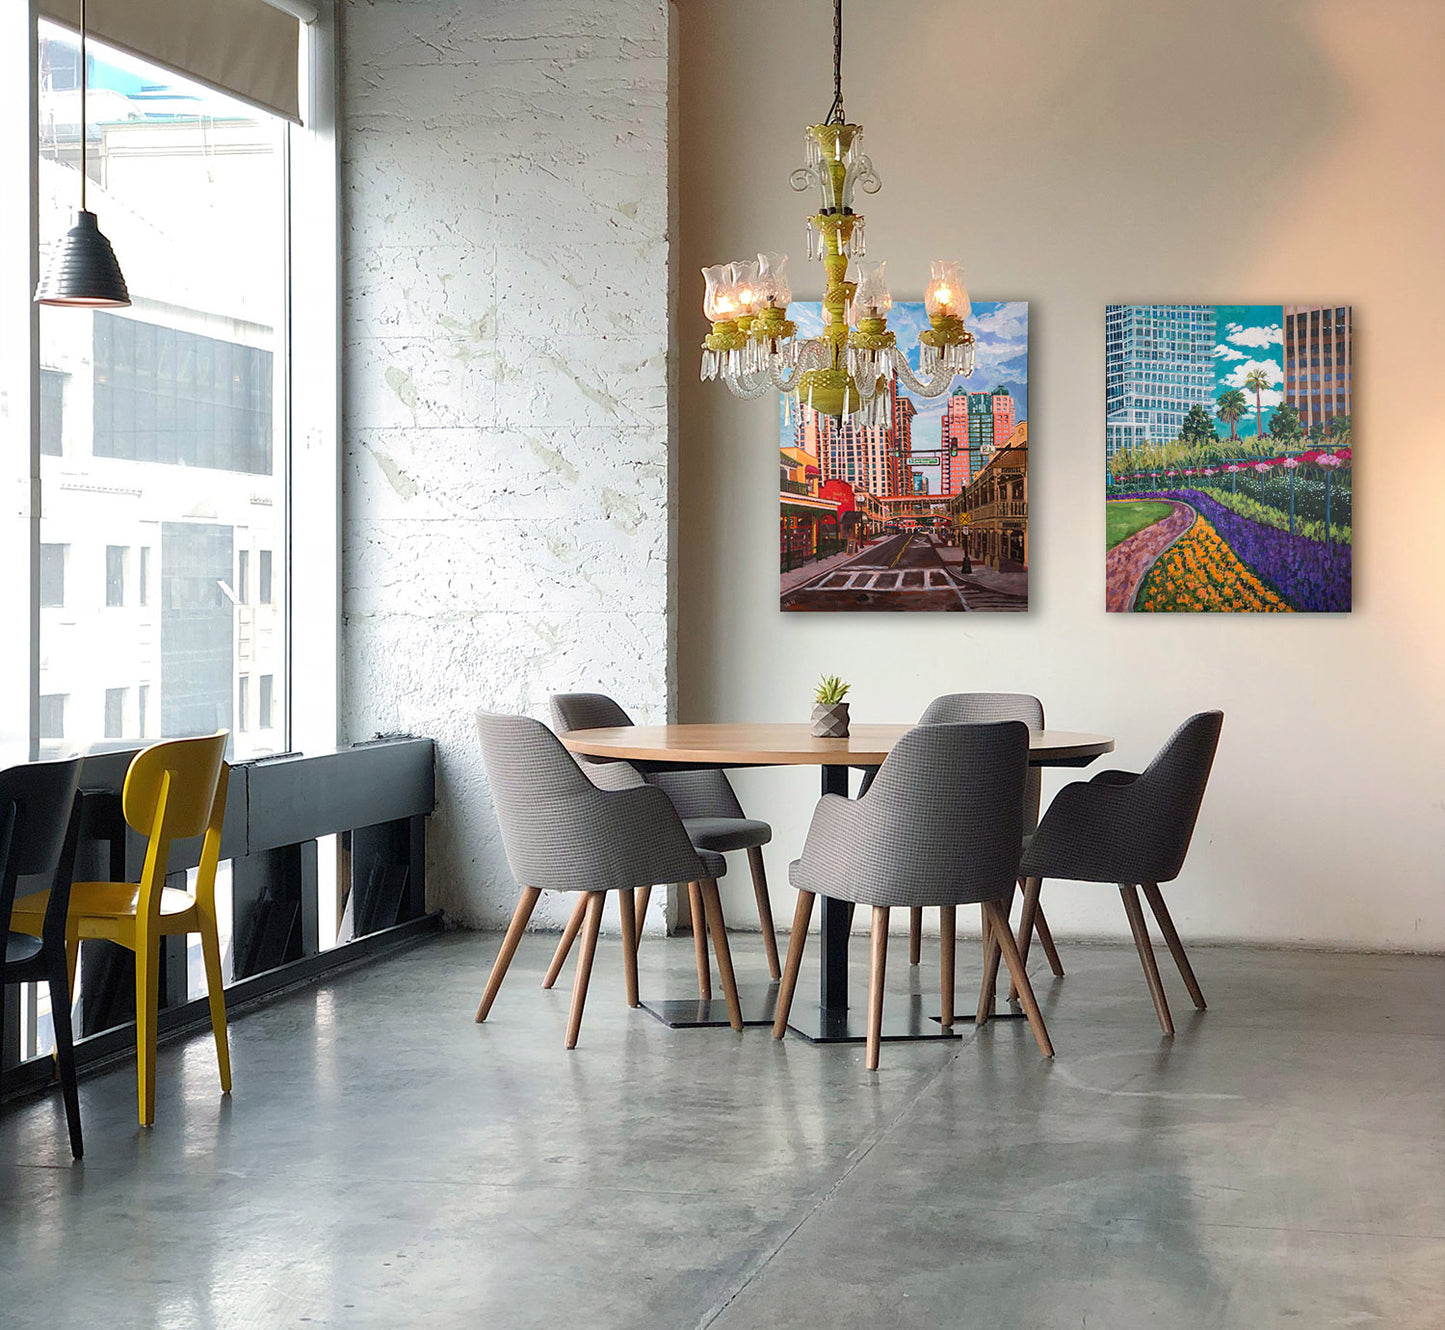 Downtown office building with two Cityscape paintings of downtown Orlando